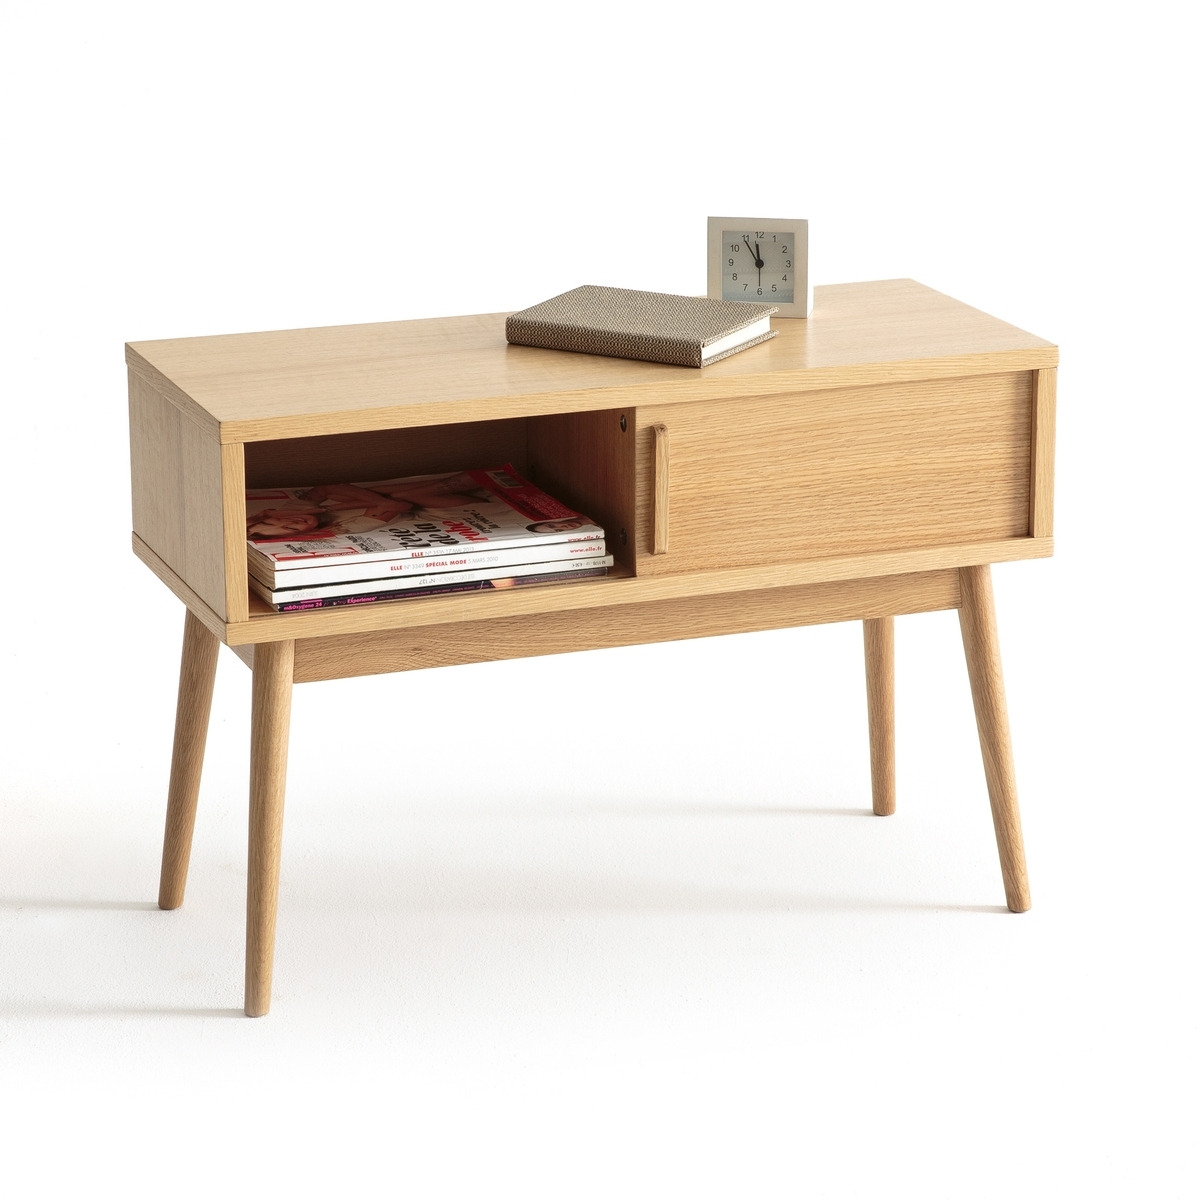 Clairoy Bedside Cabinet - image 1